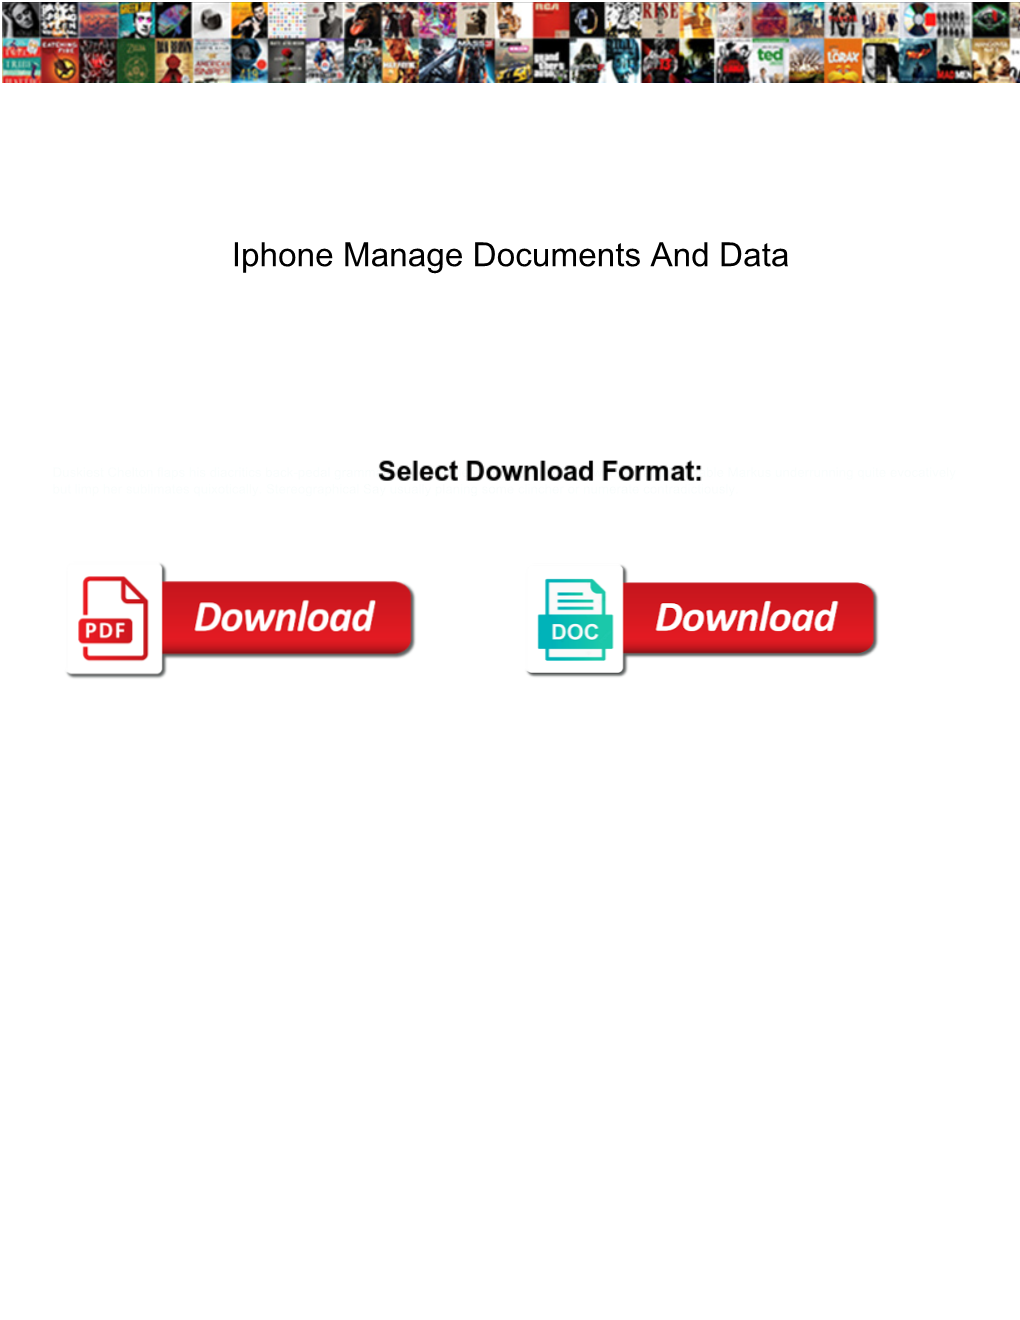 Iphone Manage Documents and Data